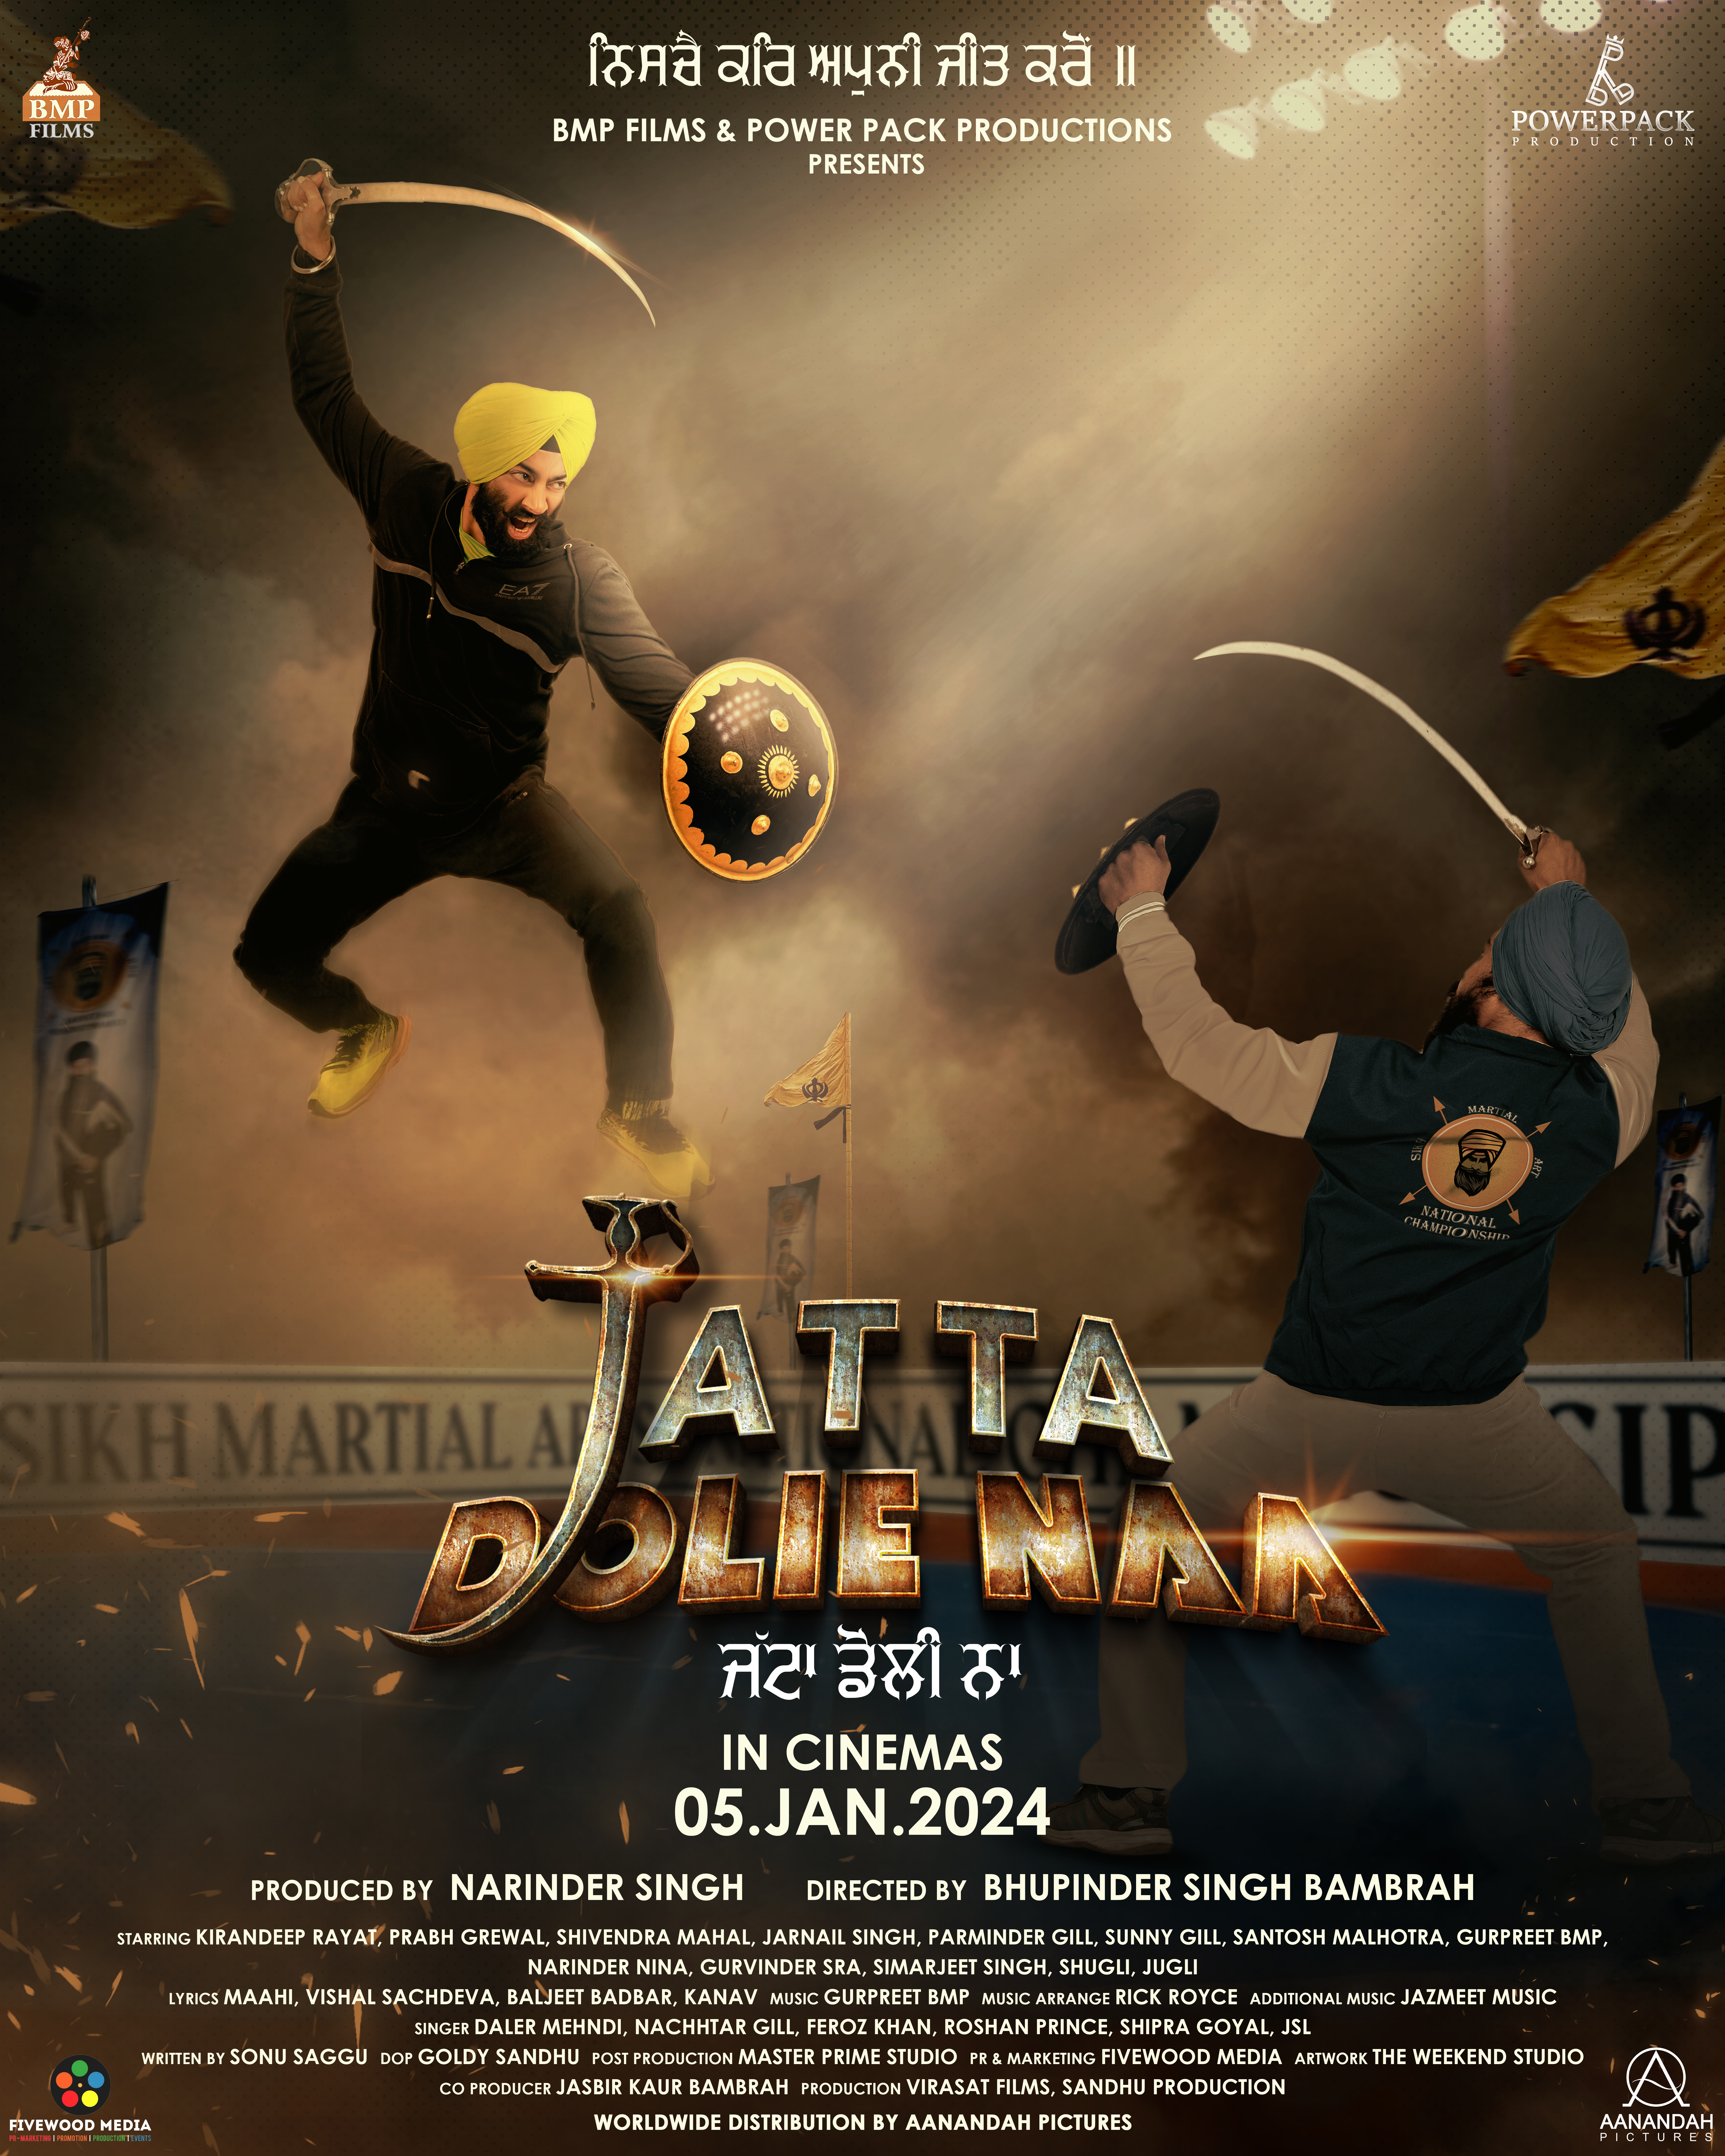 A Closer Look at the Leading Actor of This Exciting Upcoming Movie Jatta Dolie Naa